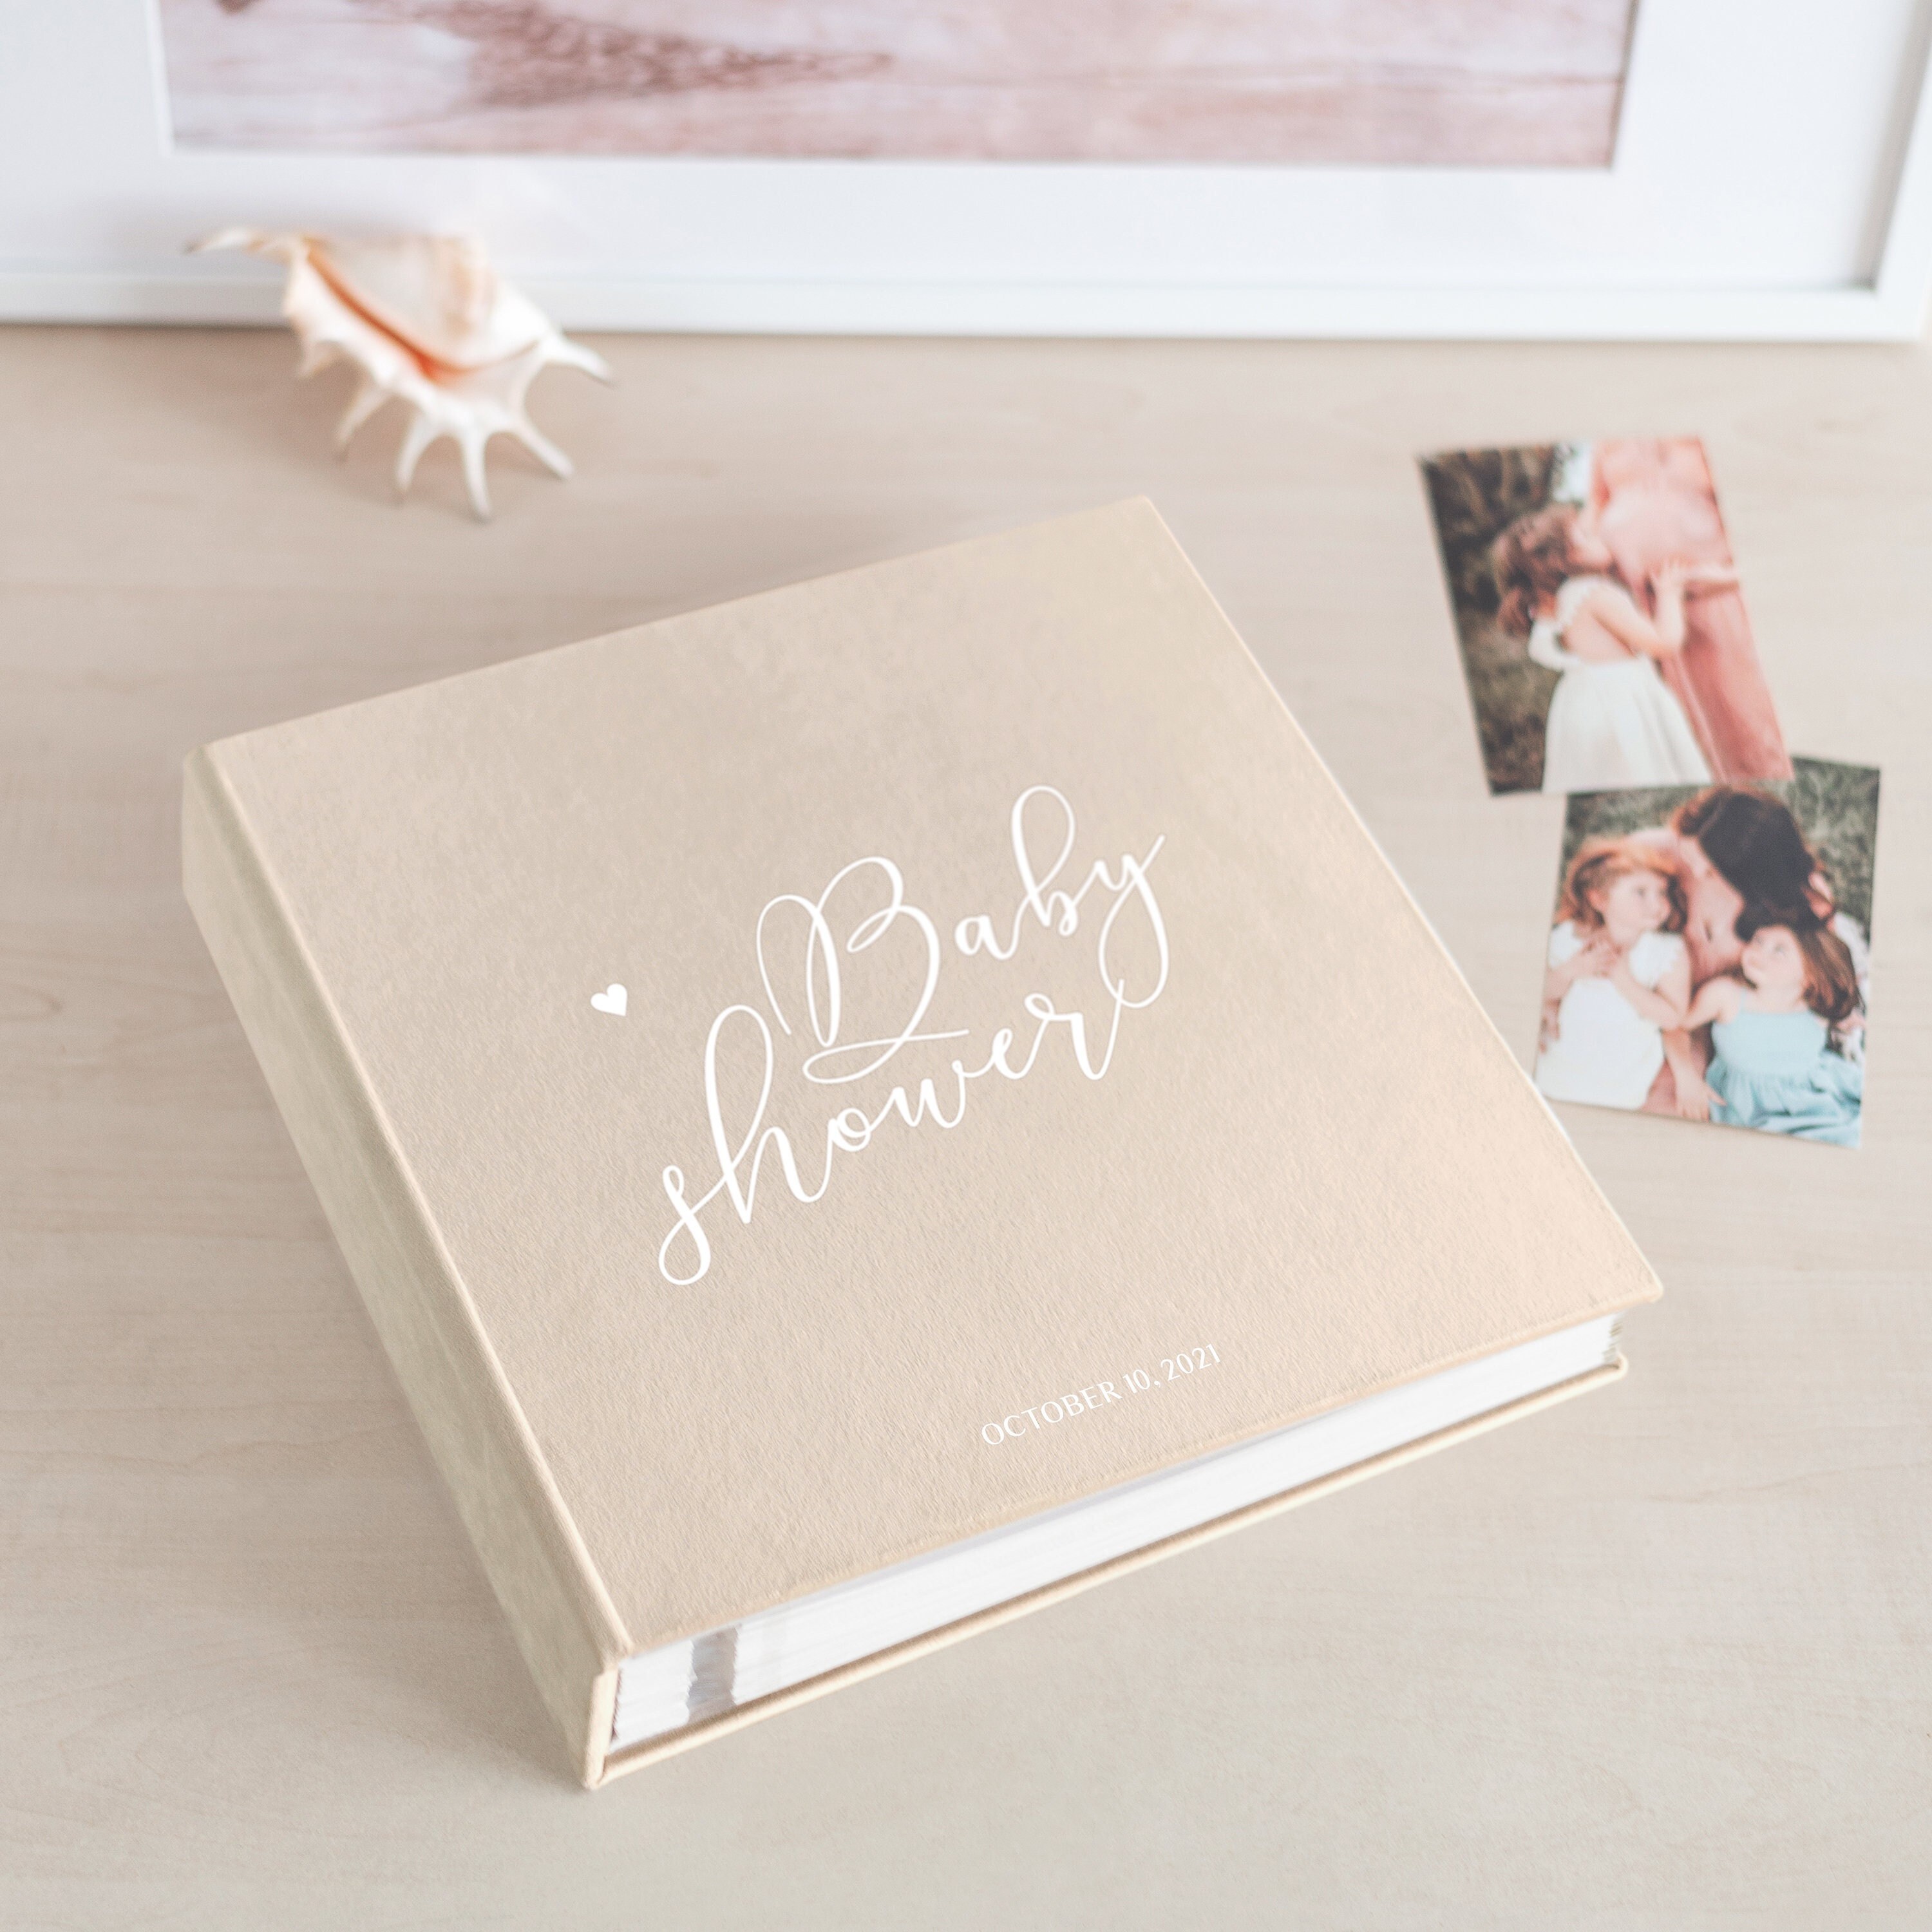 Polaroid Album Guestbook New Blank Guest Book Pink Blush Weddings Baby Showers 